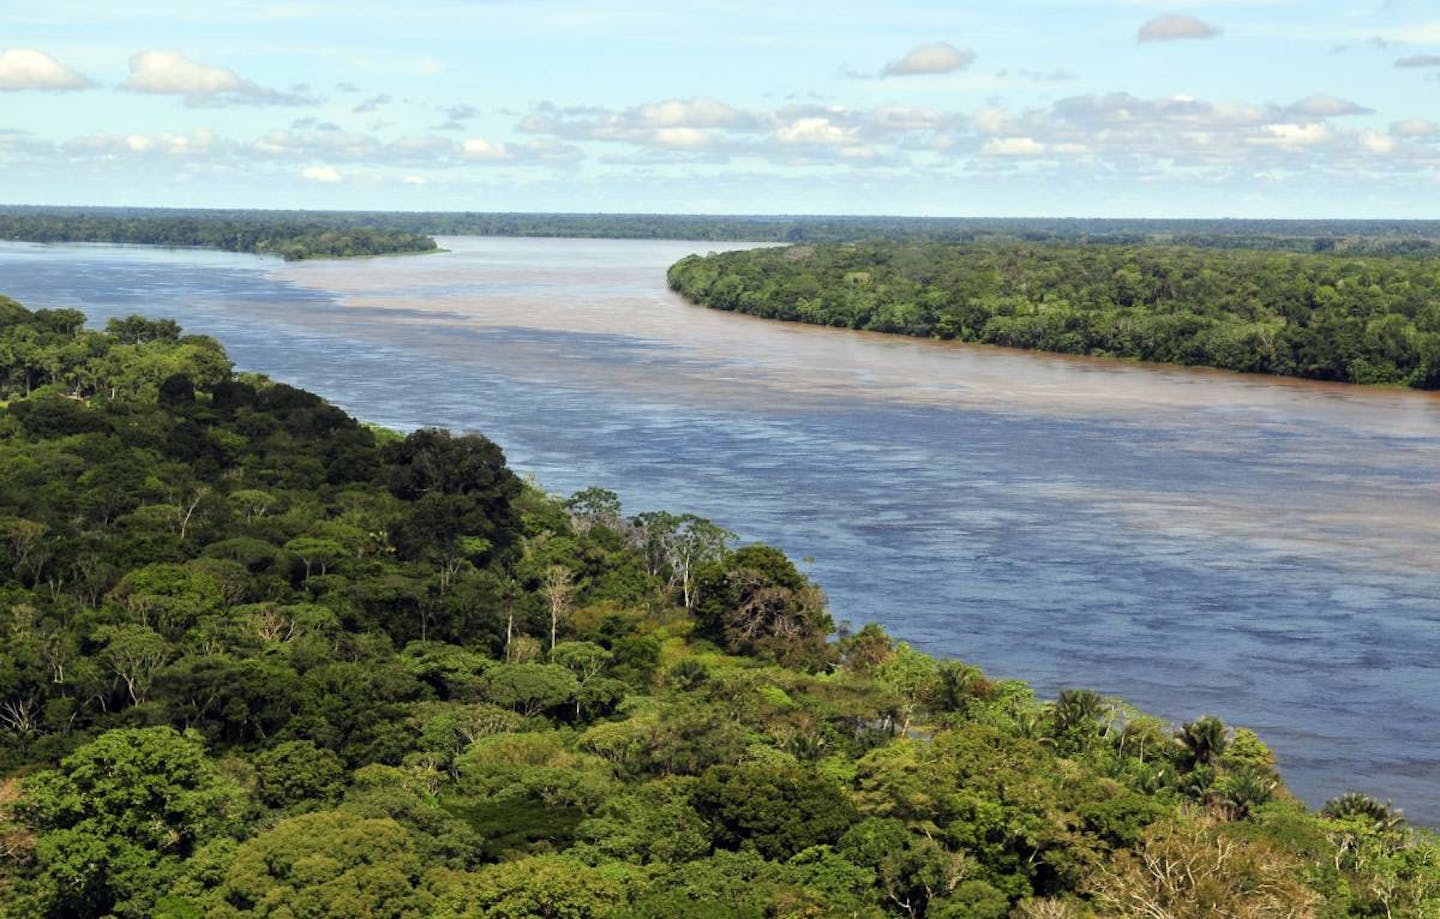 New campaign to protect 80% of the Amazonia by 2025